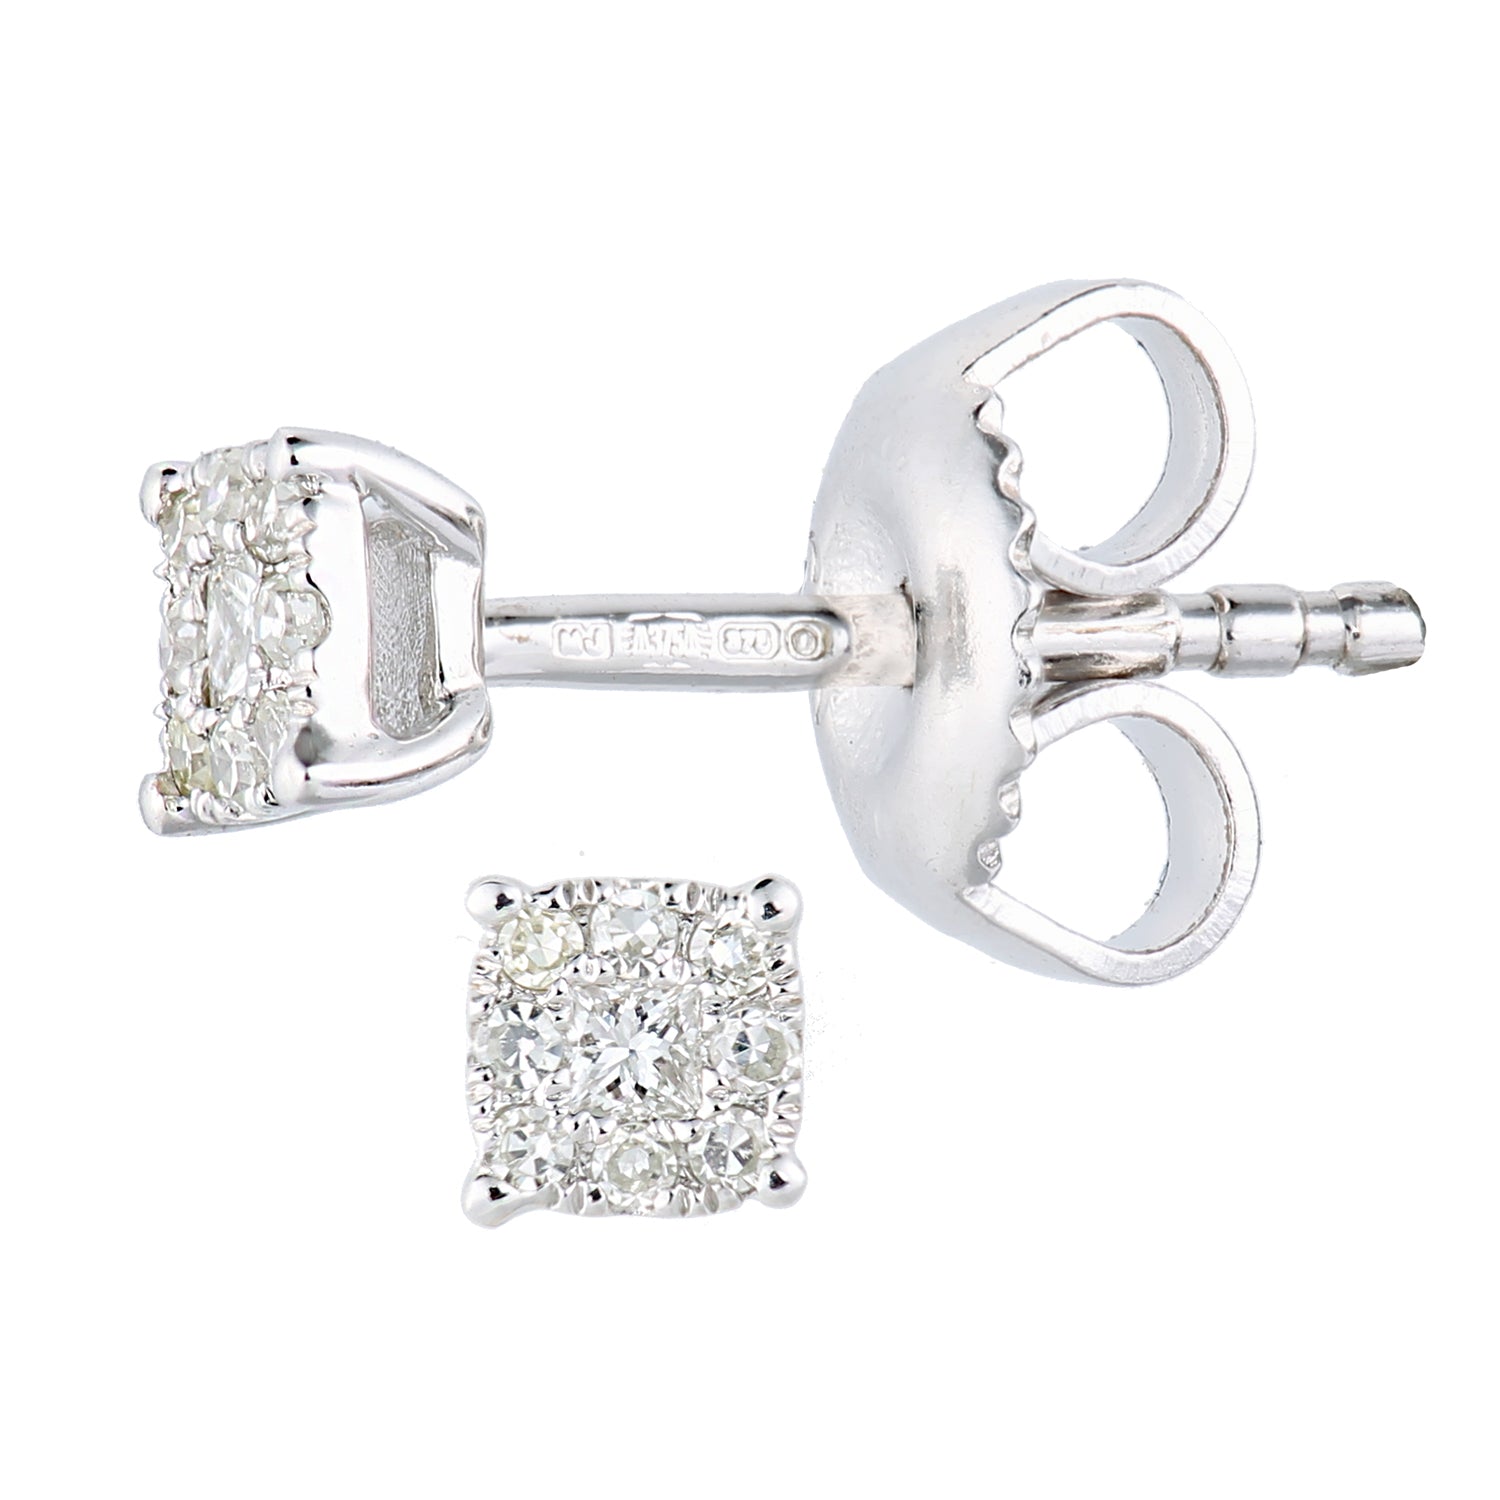 Simplicity White Gold Round Shaped Diamond Cluster Stud